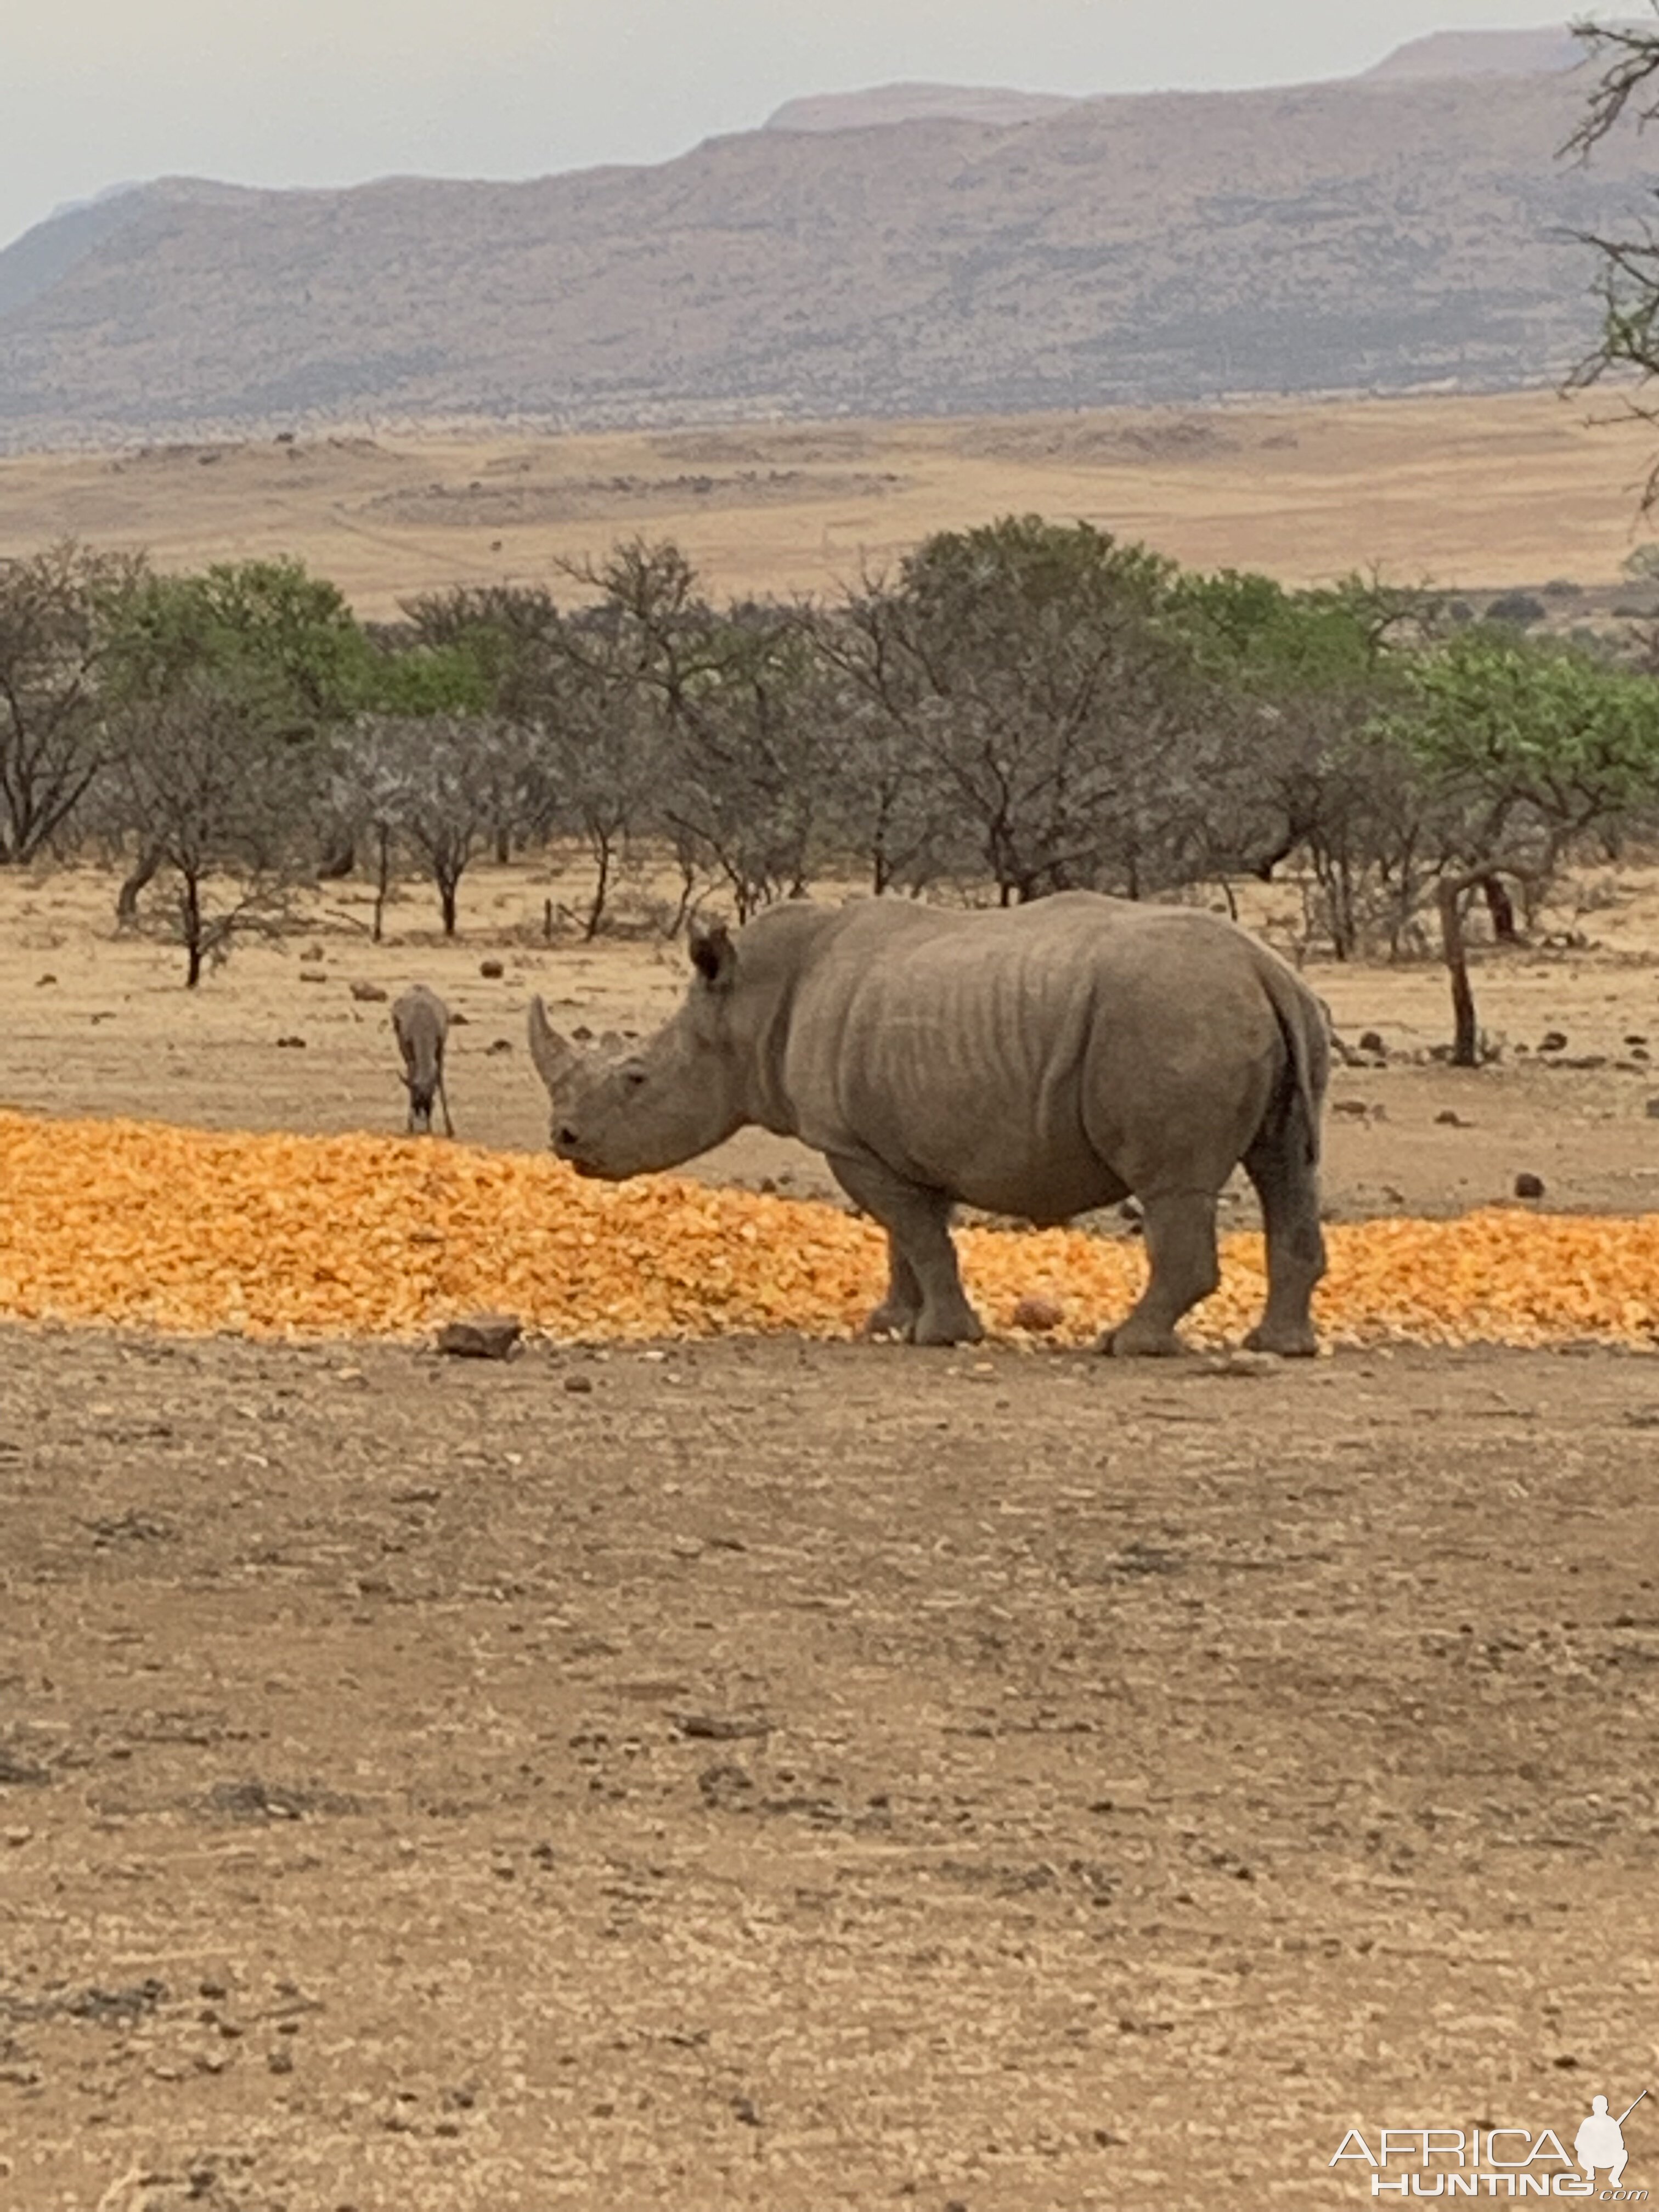 View of Rhino from Blind South Africa